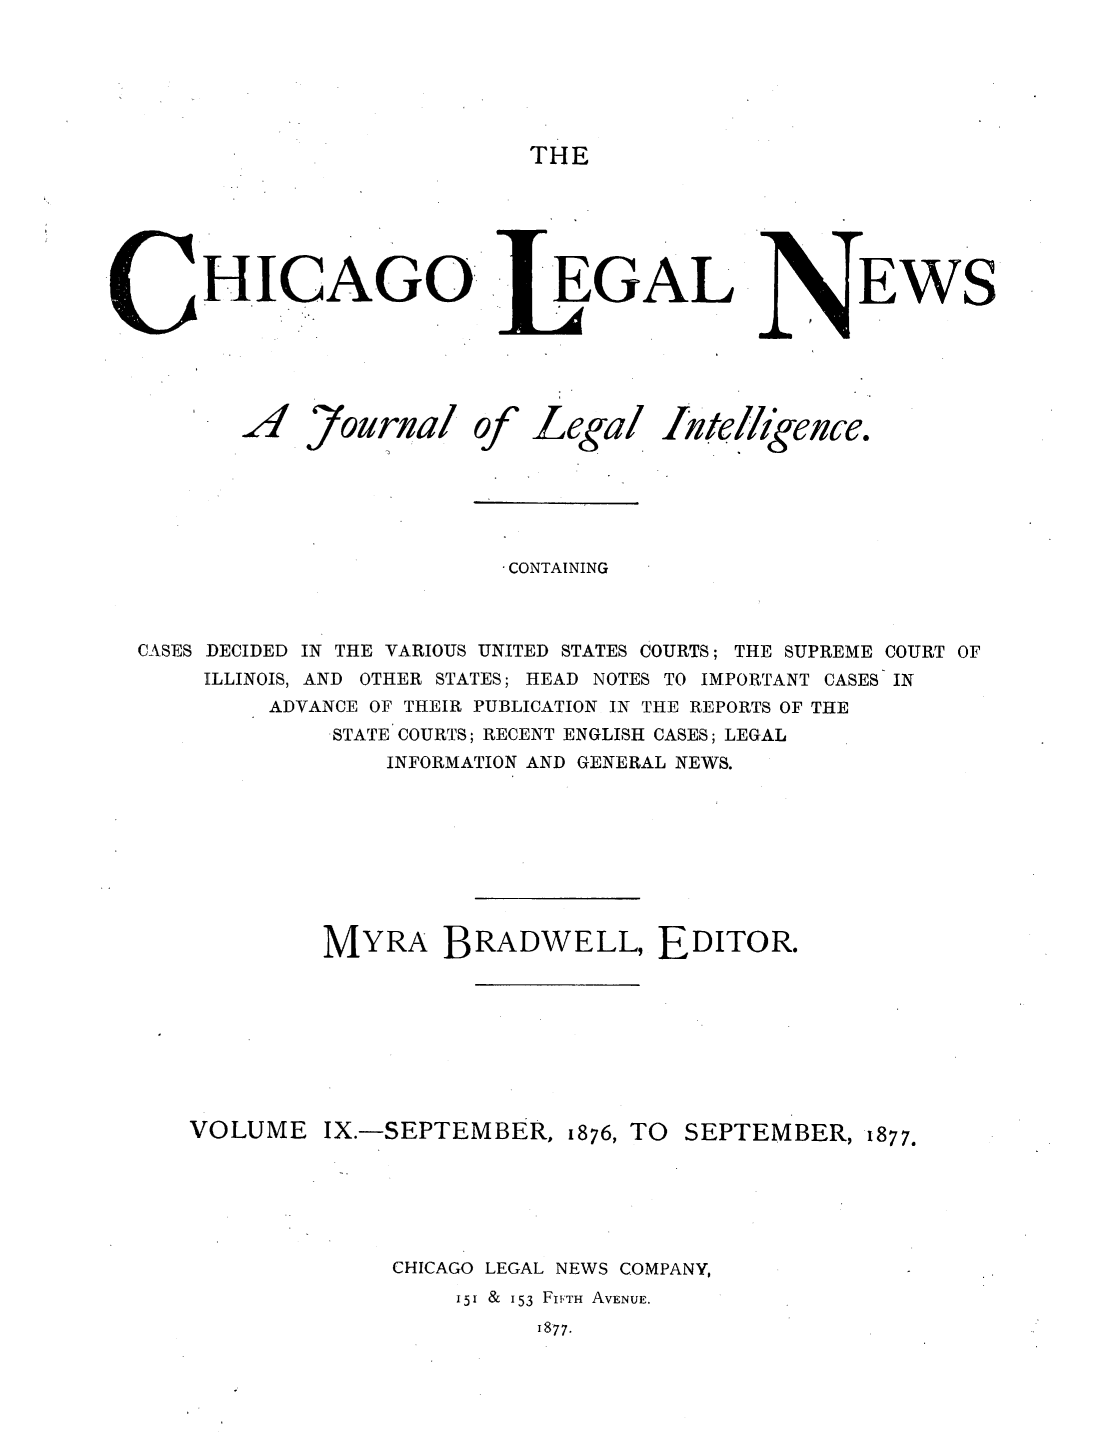 handle is hein.journals/chiclene9 and id is 1 raw text is: THEHICAGO EGALEWS7ourualofLegallt etlgence.CONTAININGCASES DECIDED IN THE VARIOUS UNITED STATES COURTS; THE SUPREME COURT OFILLINOIS, AND OTHER STATES; HEAD NOTES TO IMPORTANT CASES INADVANCE OF THEIR PUBLICATION IN THE REPORTS OF THESTATE COURTS; RECENT ENGLISH CASES; LEGALINFORMATION AND GENERAL NEWS.MYRA BRADWELL, EDITOR.VOLUME IX.-SEPTEMBER, 1876, TO SEPTEMBER, 1877.CHICAGO LEGAL NEWS COMPANY,151 &  153 FIFTH AVENUE.1877..A4